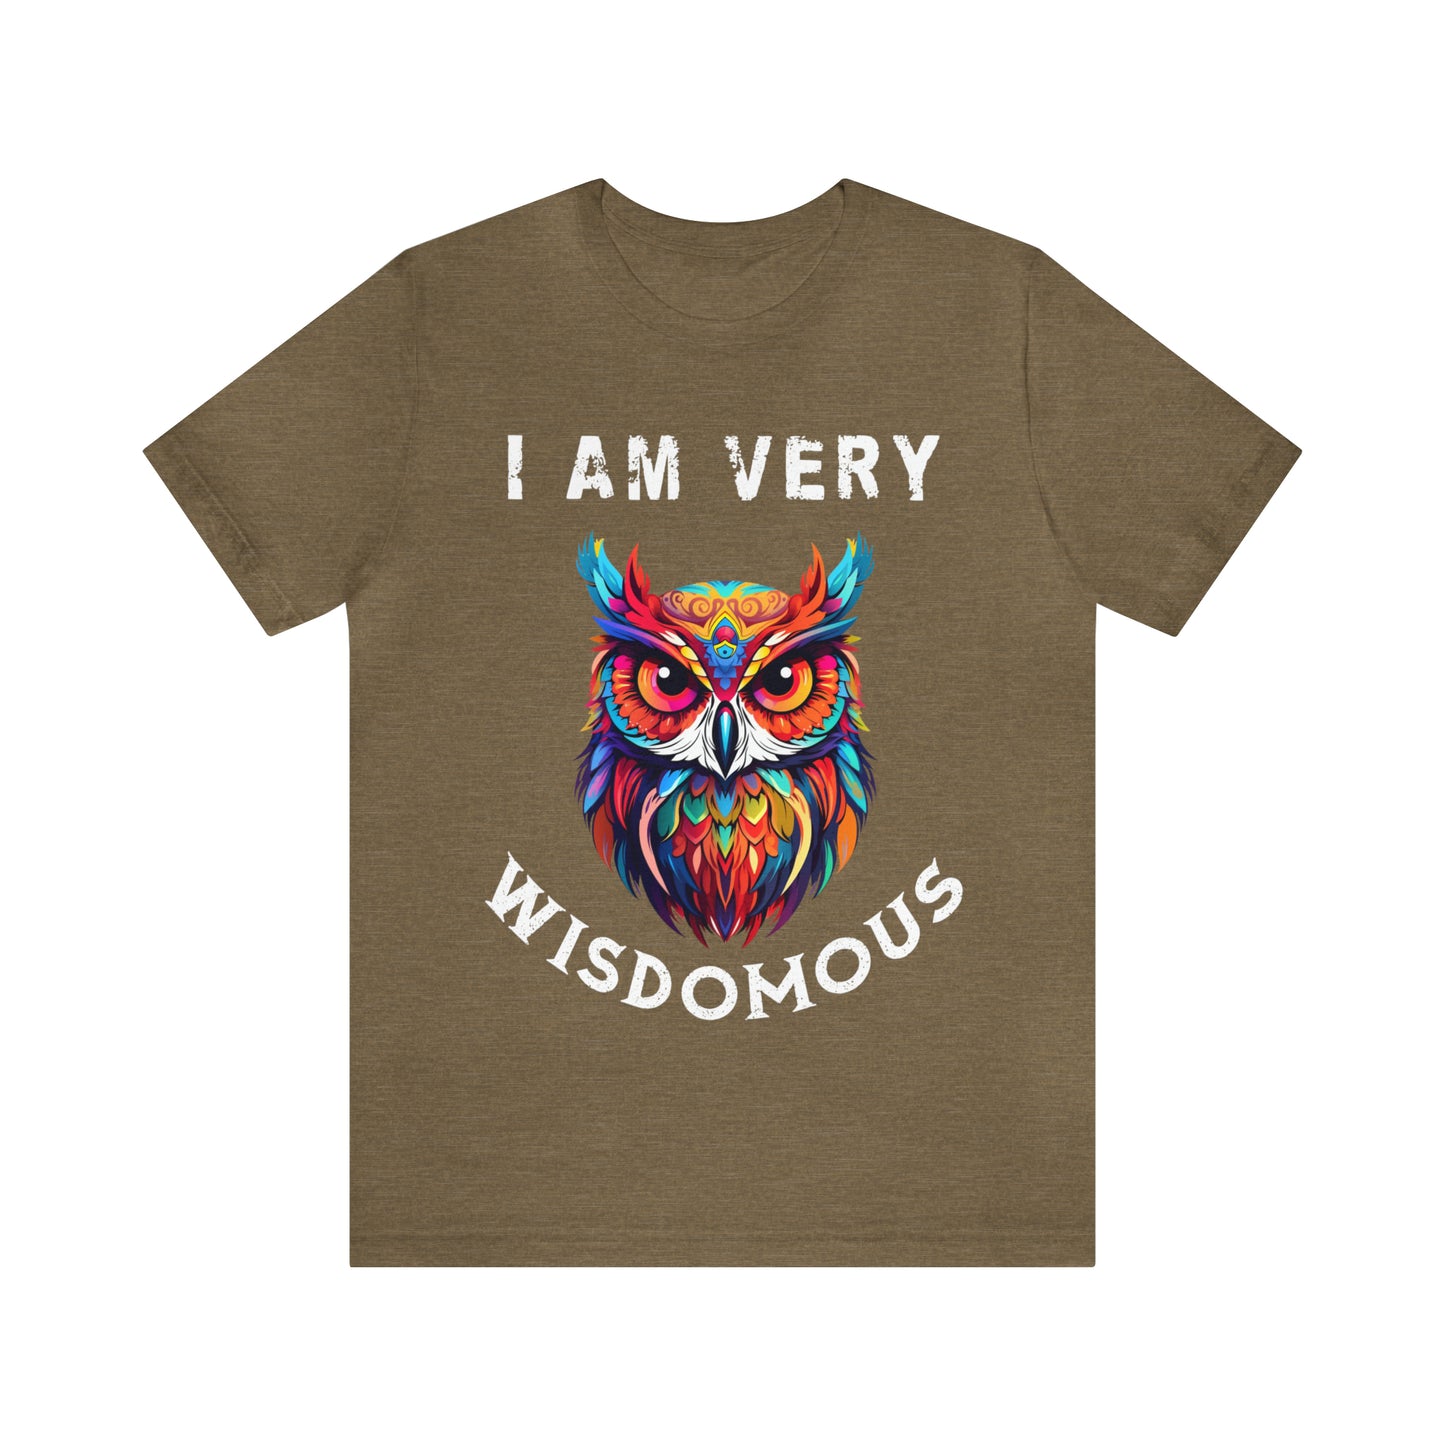 Men's T-Shirt, I Am Very Wisdomous, funny T-shirt, Gift for Dad, Husband Gift, Owl T-Shirt, Father's Day Gift